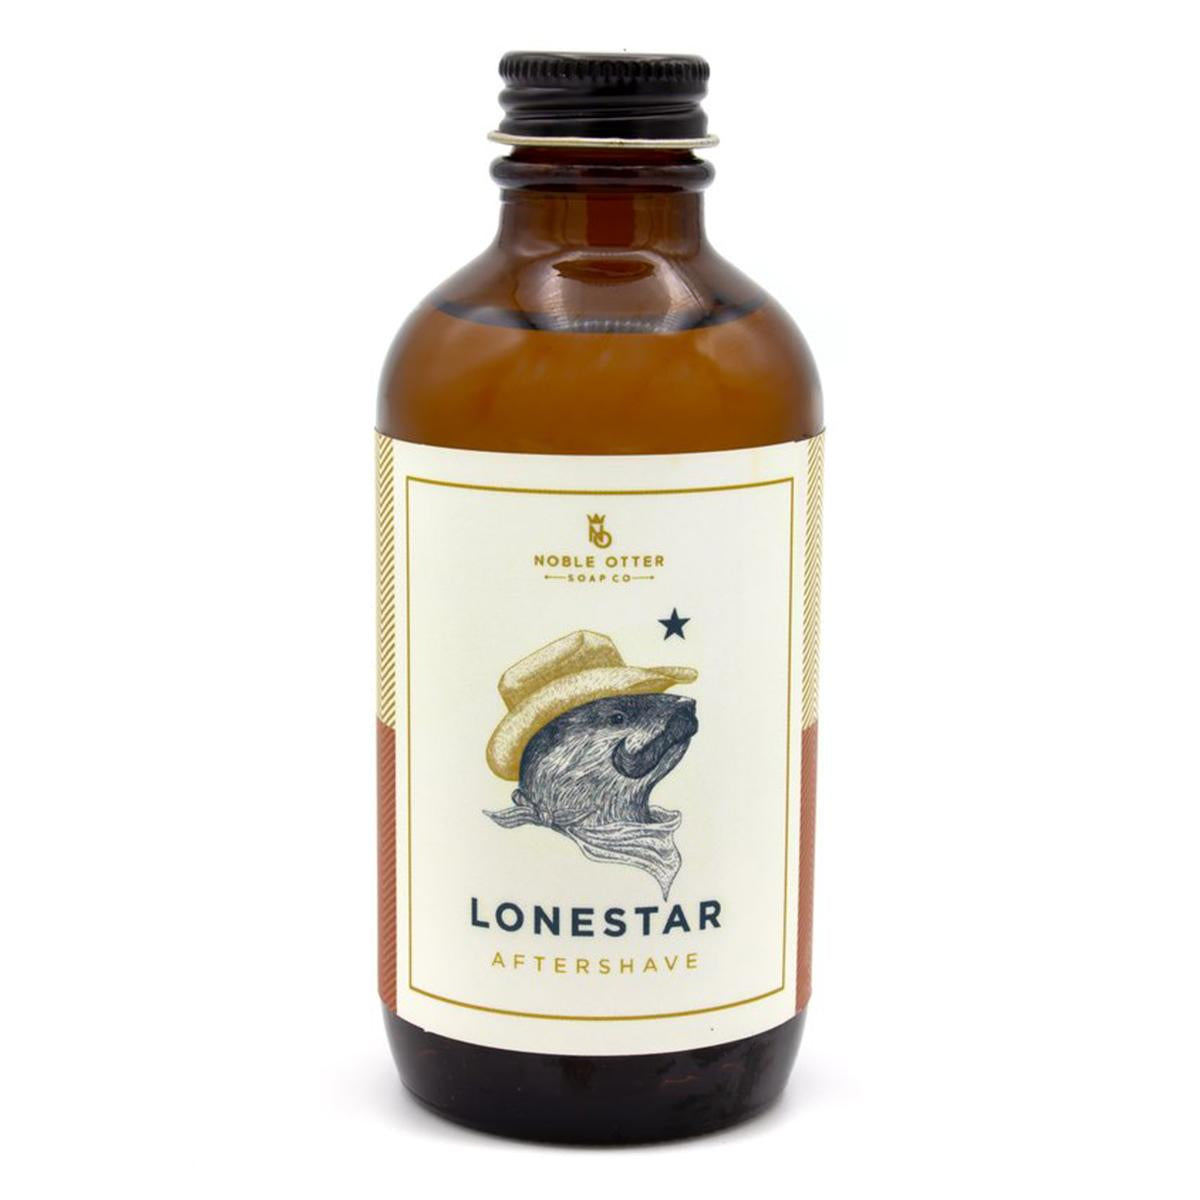 Primary image of Lonestar Aftershave